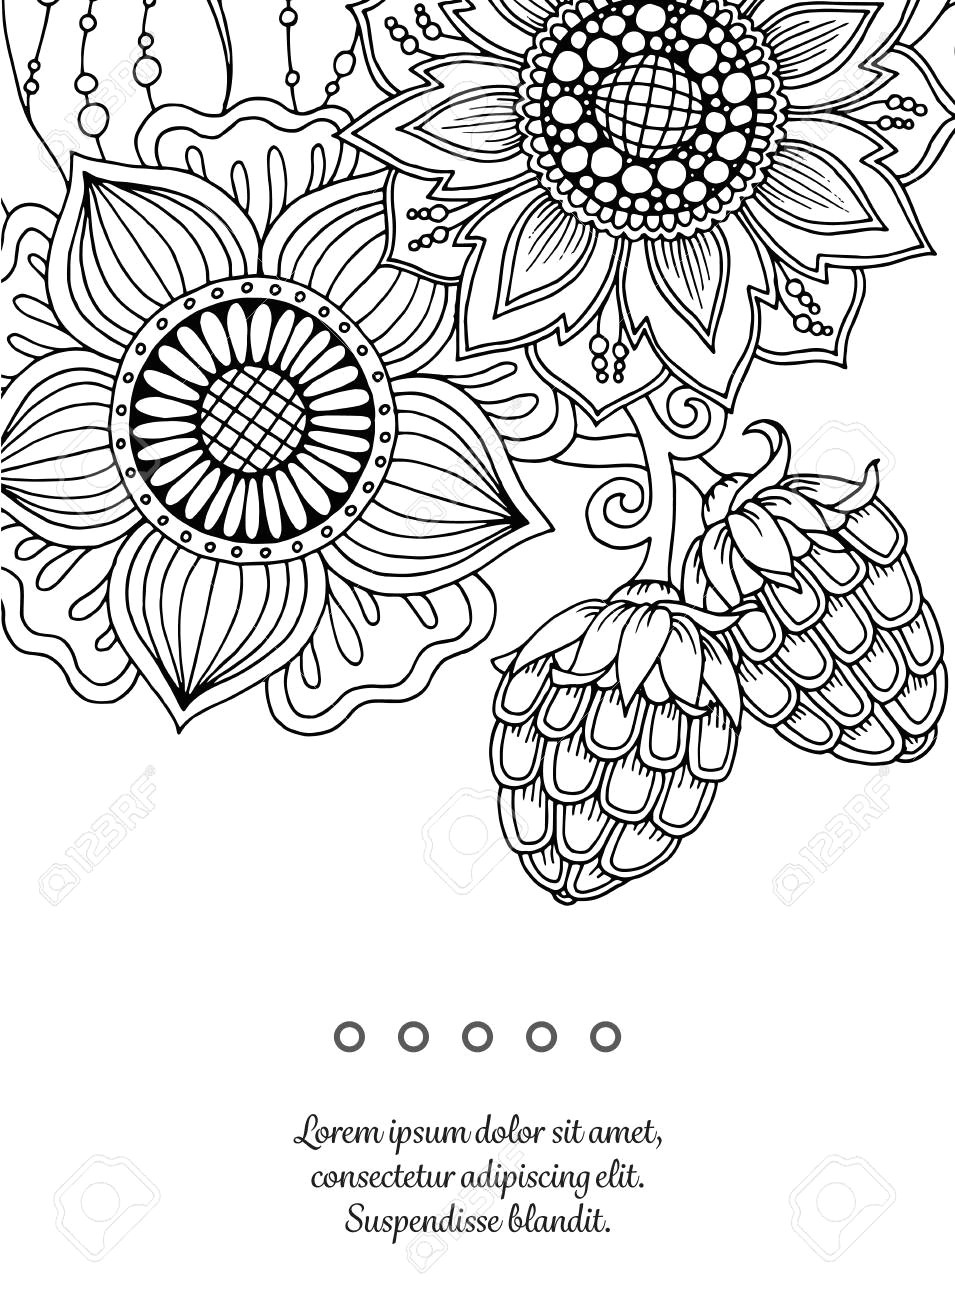 hand drawn artwork with abstract flowers background for web printed media